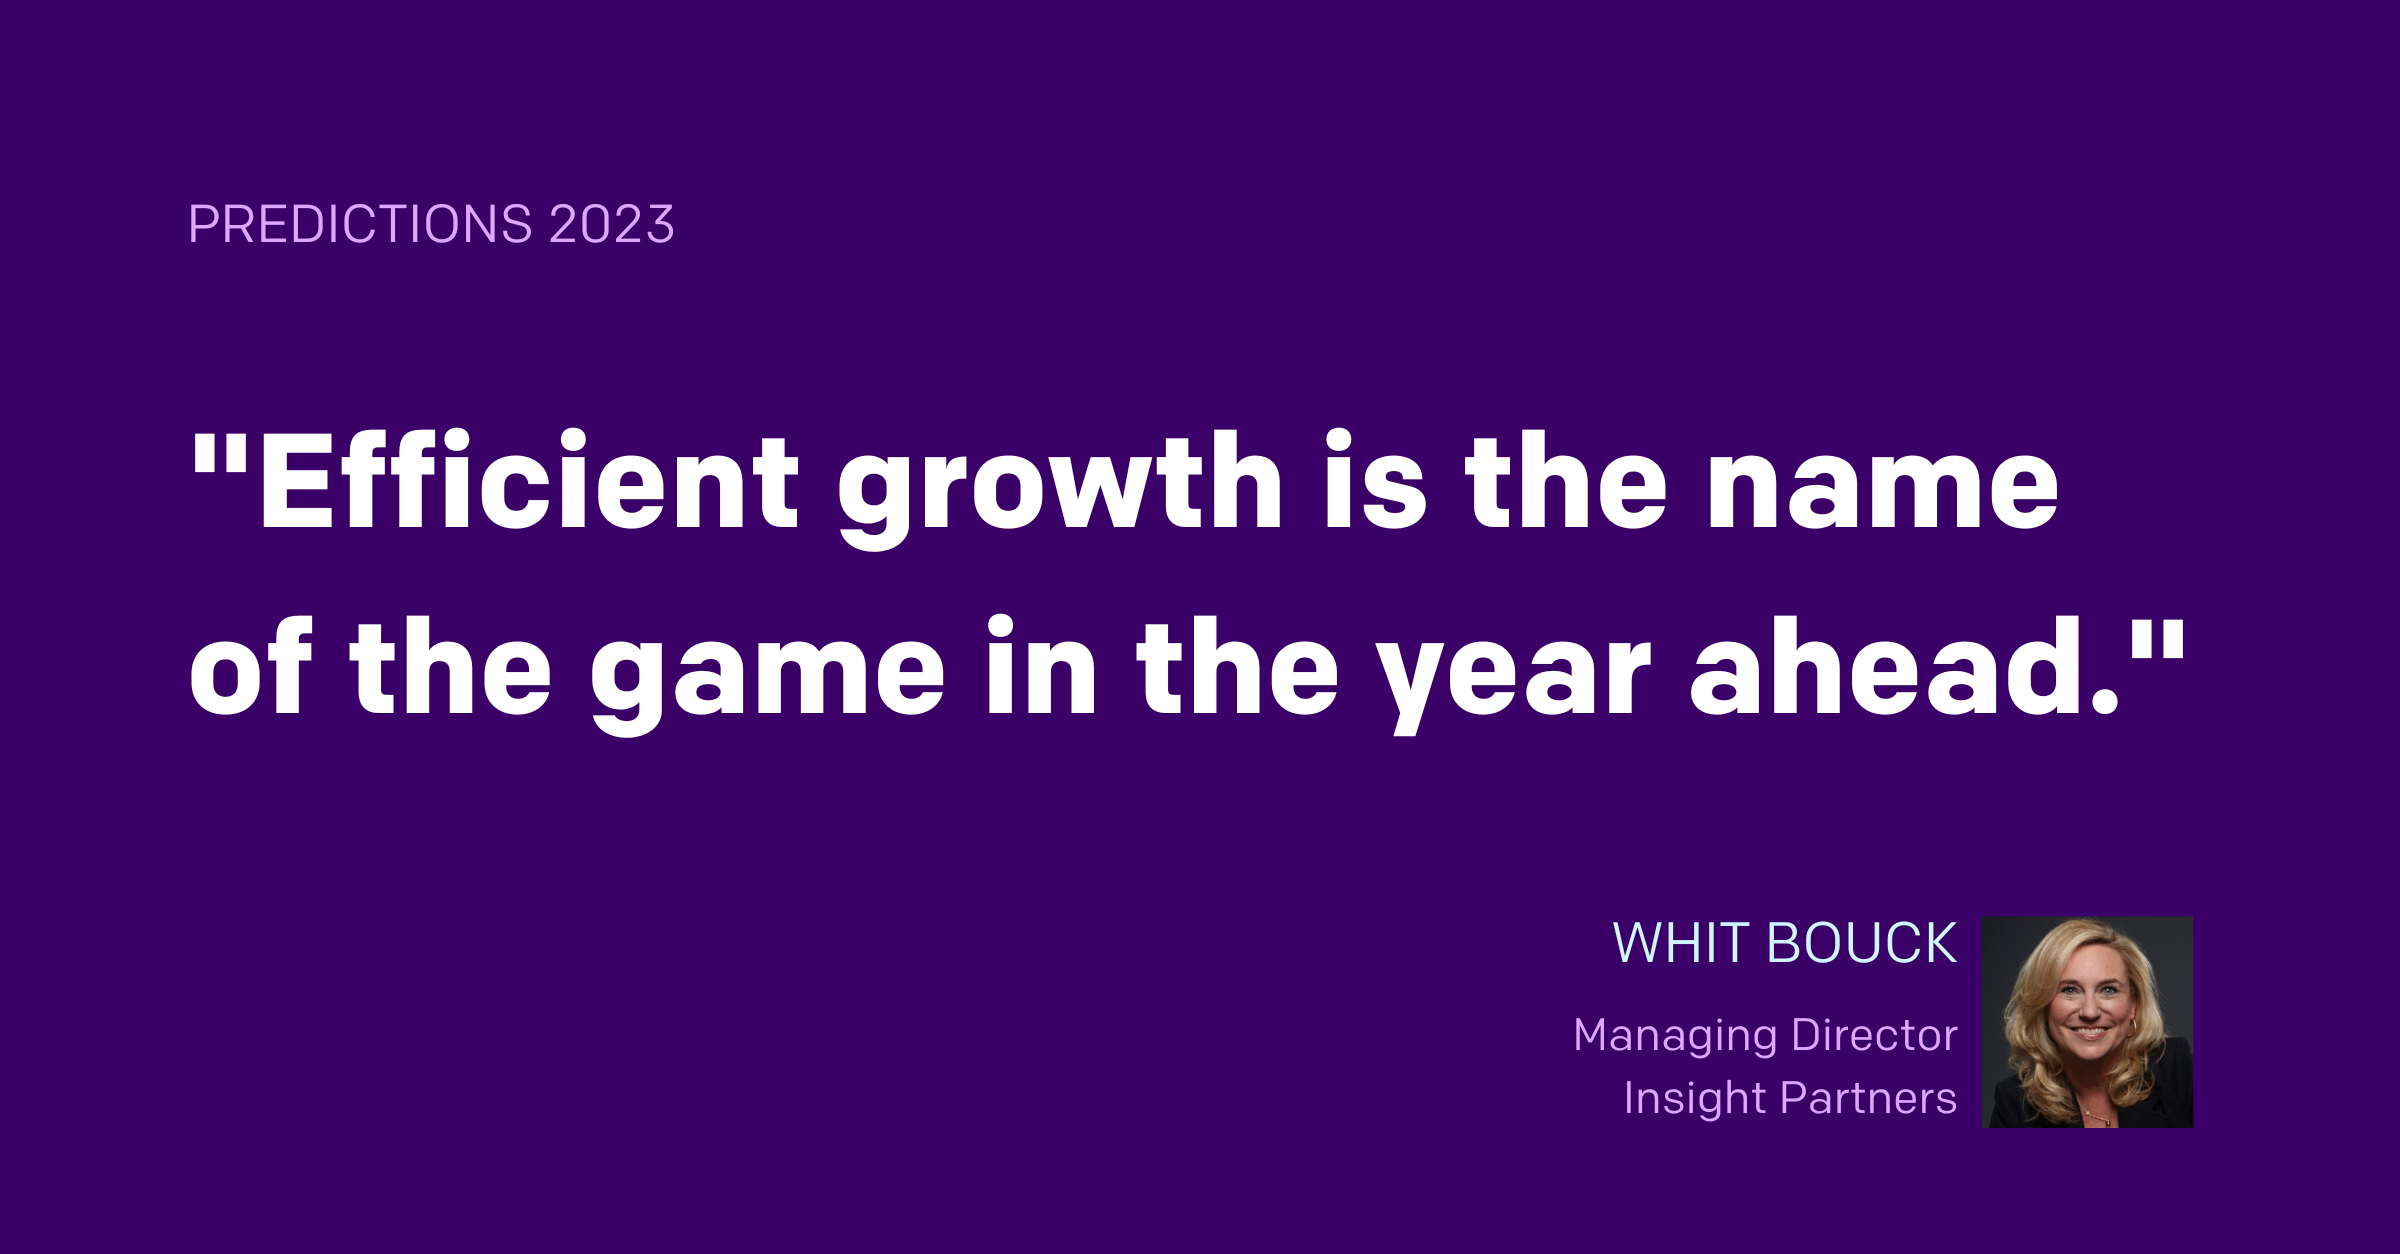 Efficient growth is the name of the game in 2023